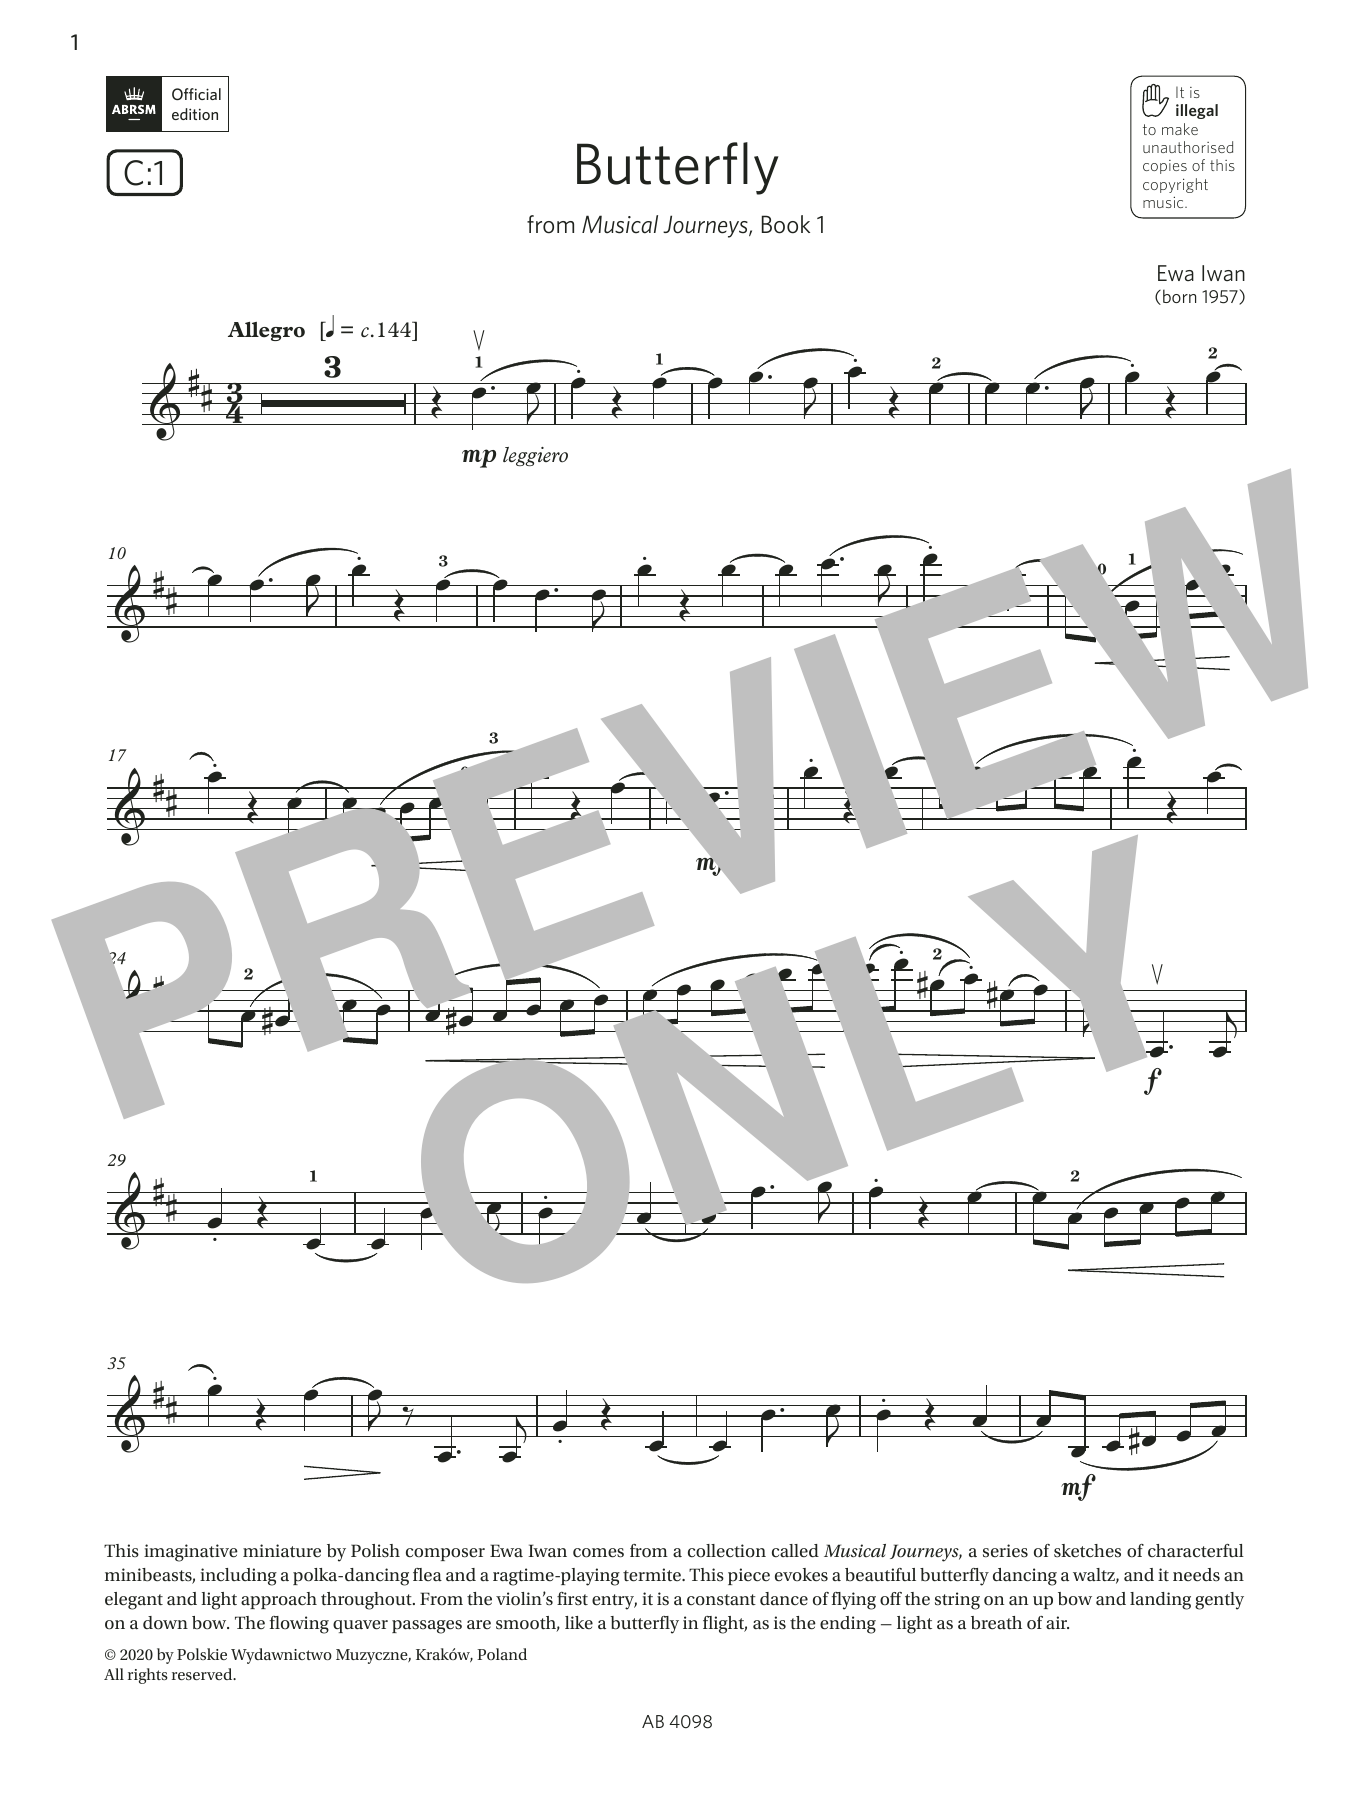 Download Ewa Iwan Butterfly (Grade 4, C1, from the ABRSM Sheet Music